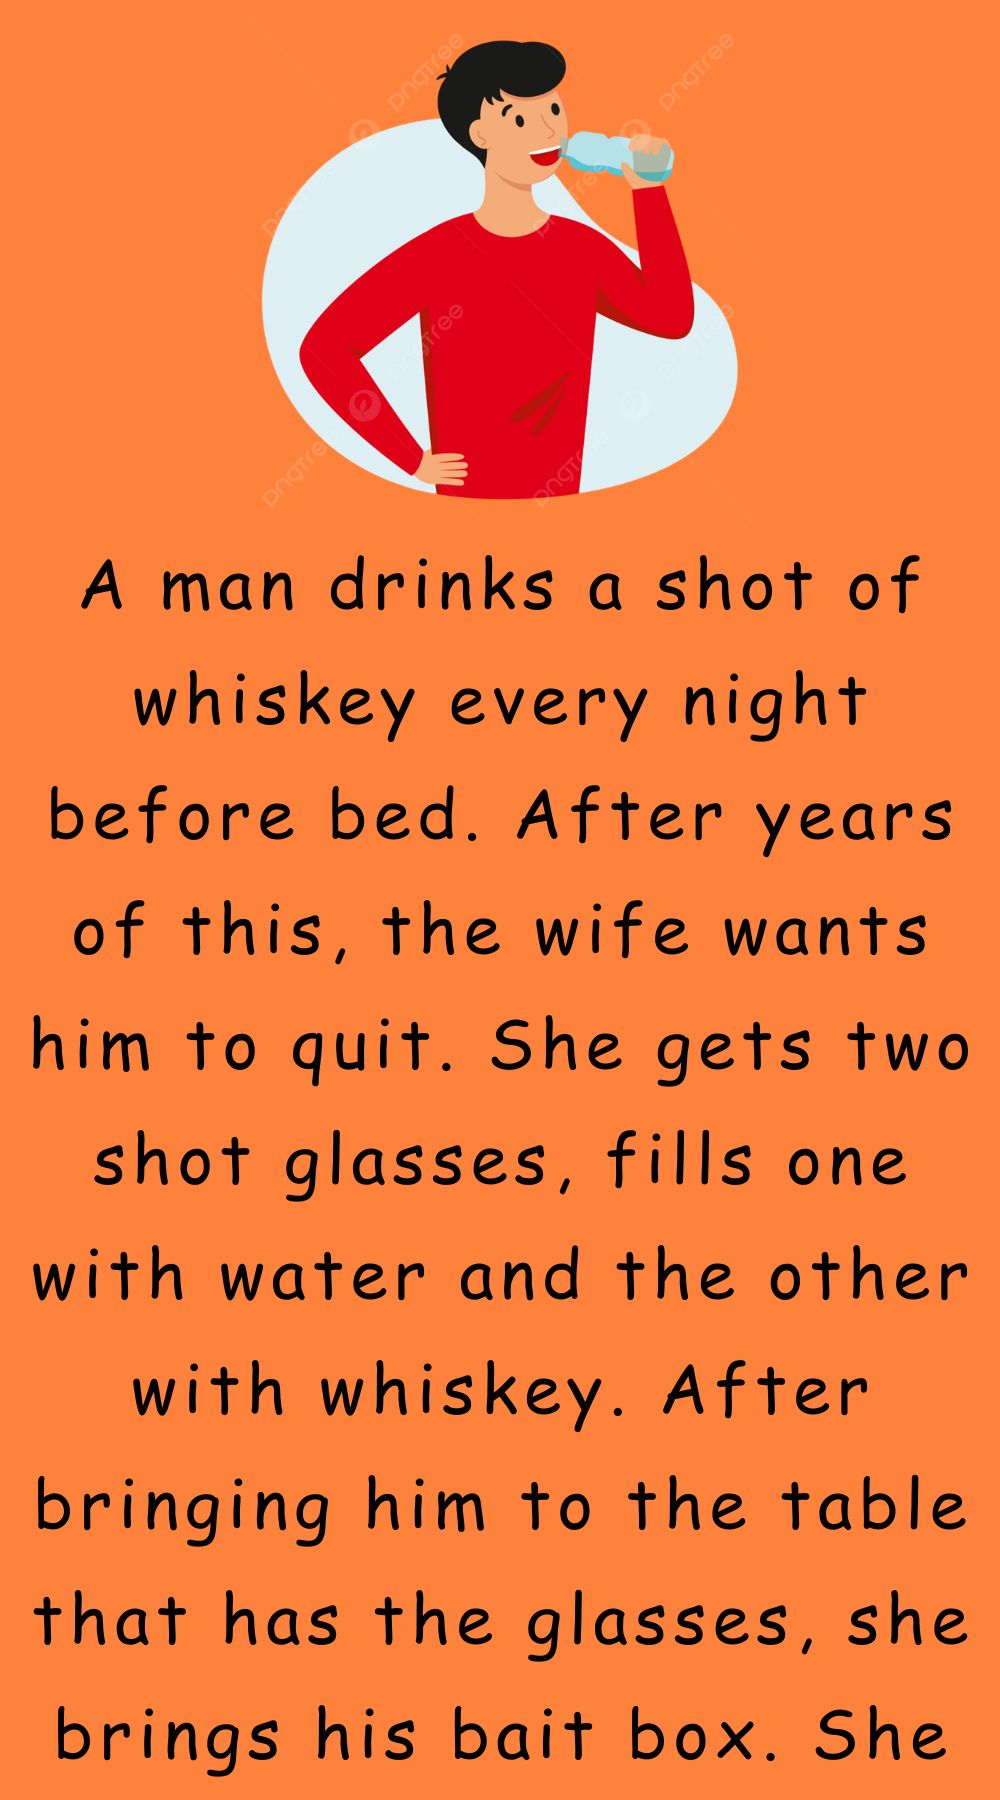 A man drinks a shot of whiskey every night